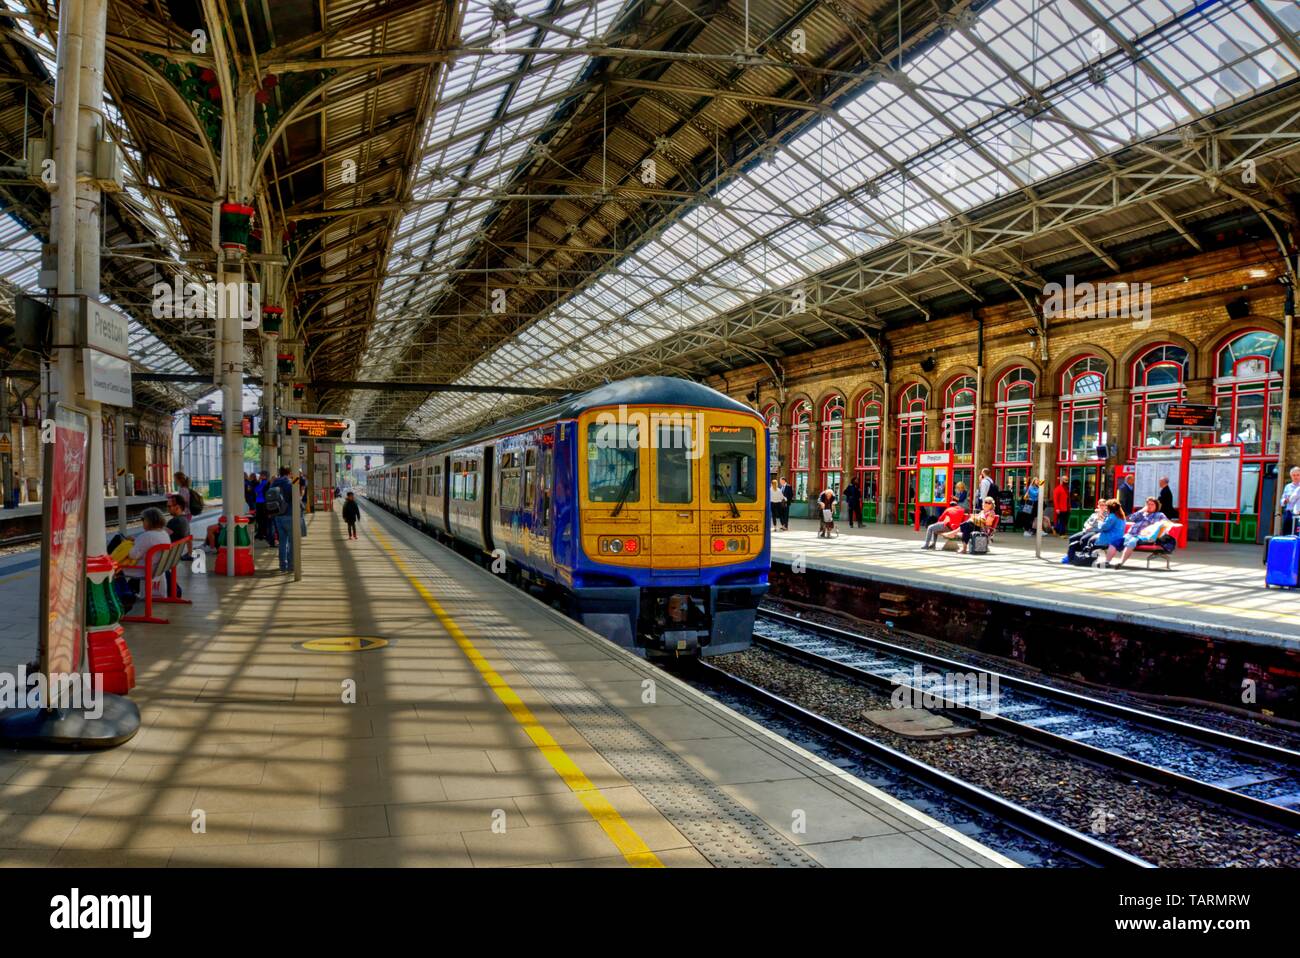 Preston, United Kingdom - May 14, 2019: Preston railway station In north west England with train at platform and passengers some motion blurred on adj Stock Photo